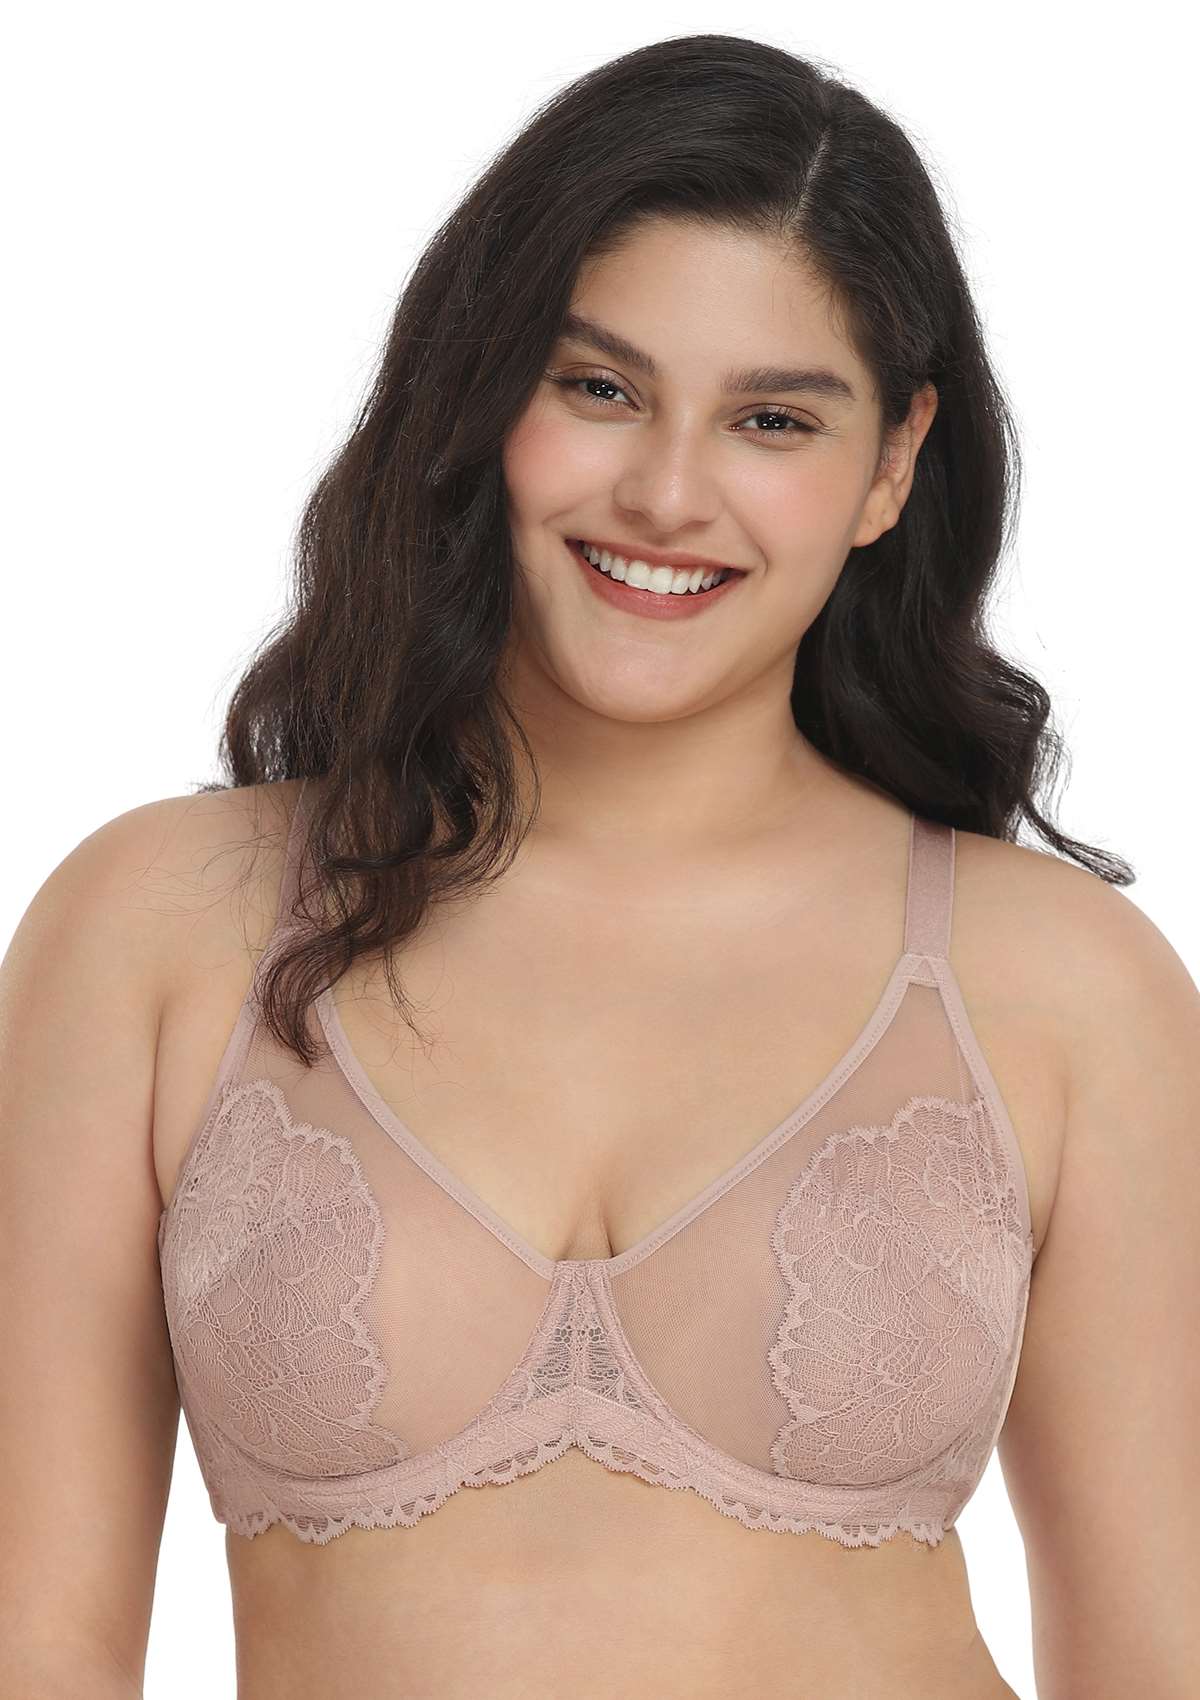 HSIA Blossom Lace Bra And Panties Set: Best Bra For Large Busts - Dark Pink / 42 / C